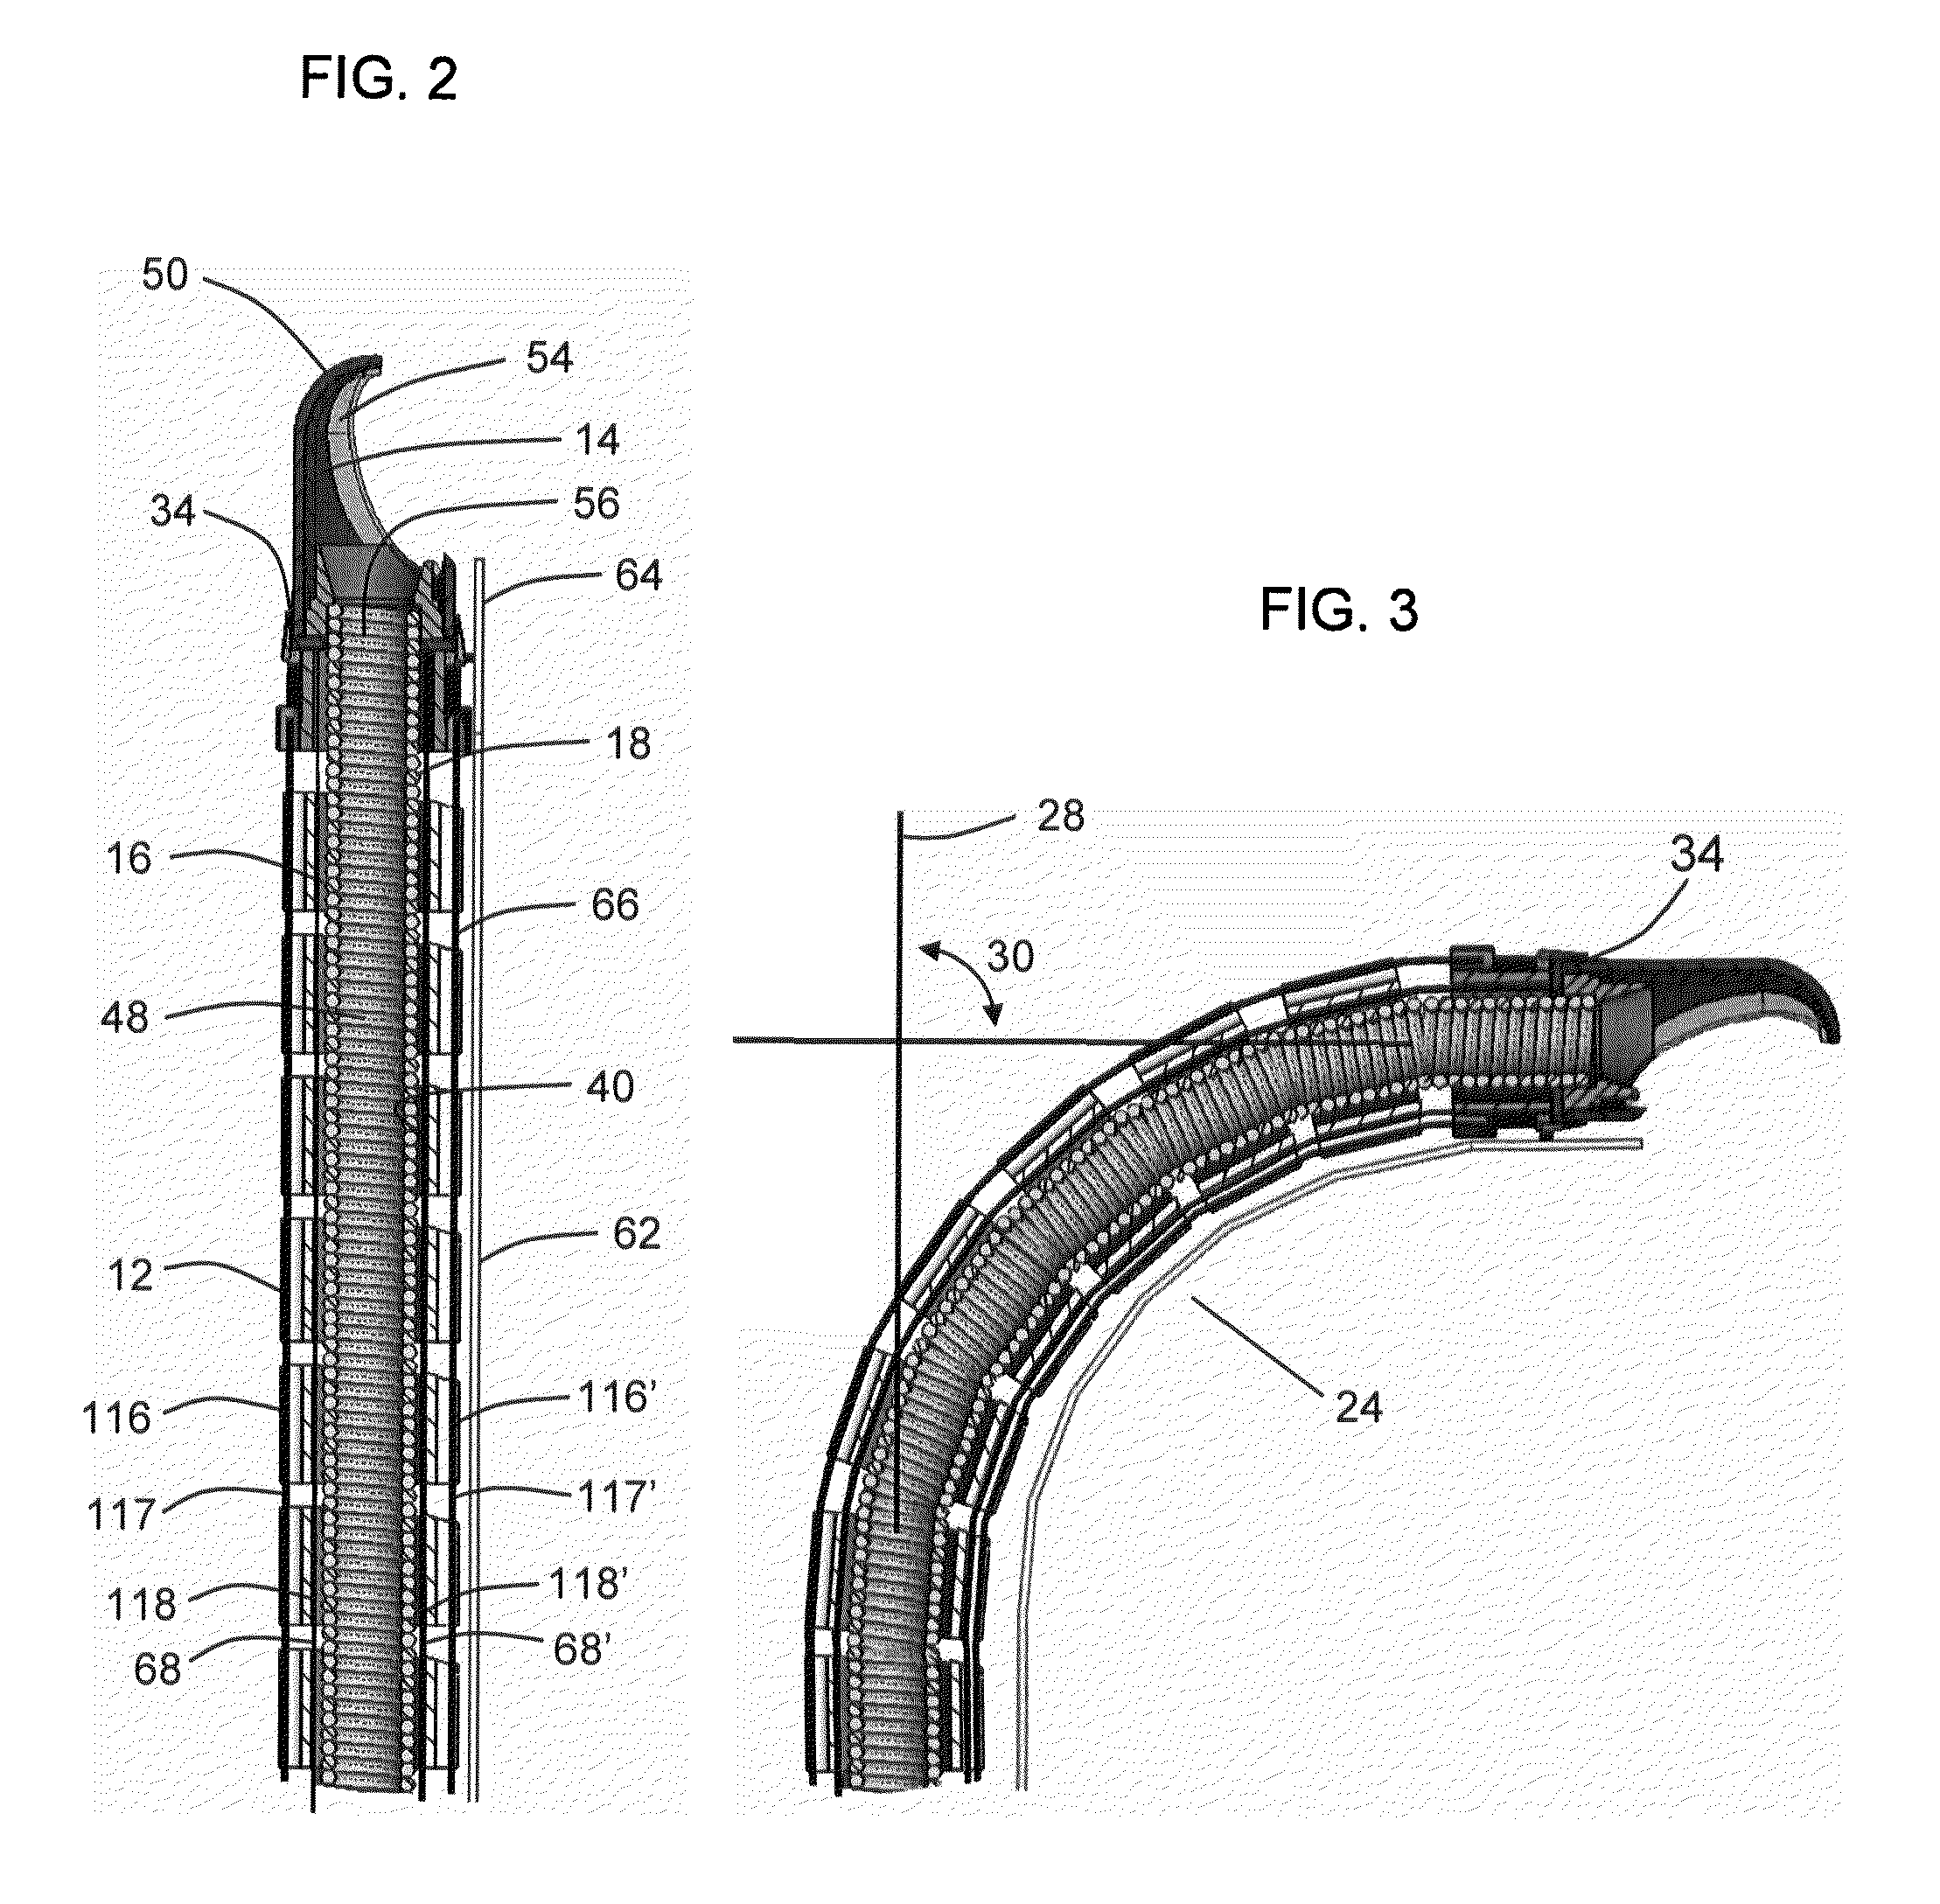 Apparatus and methods for removal of intervertebral disc tissues